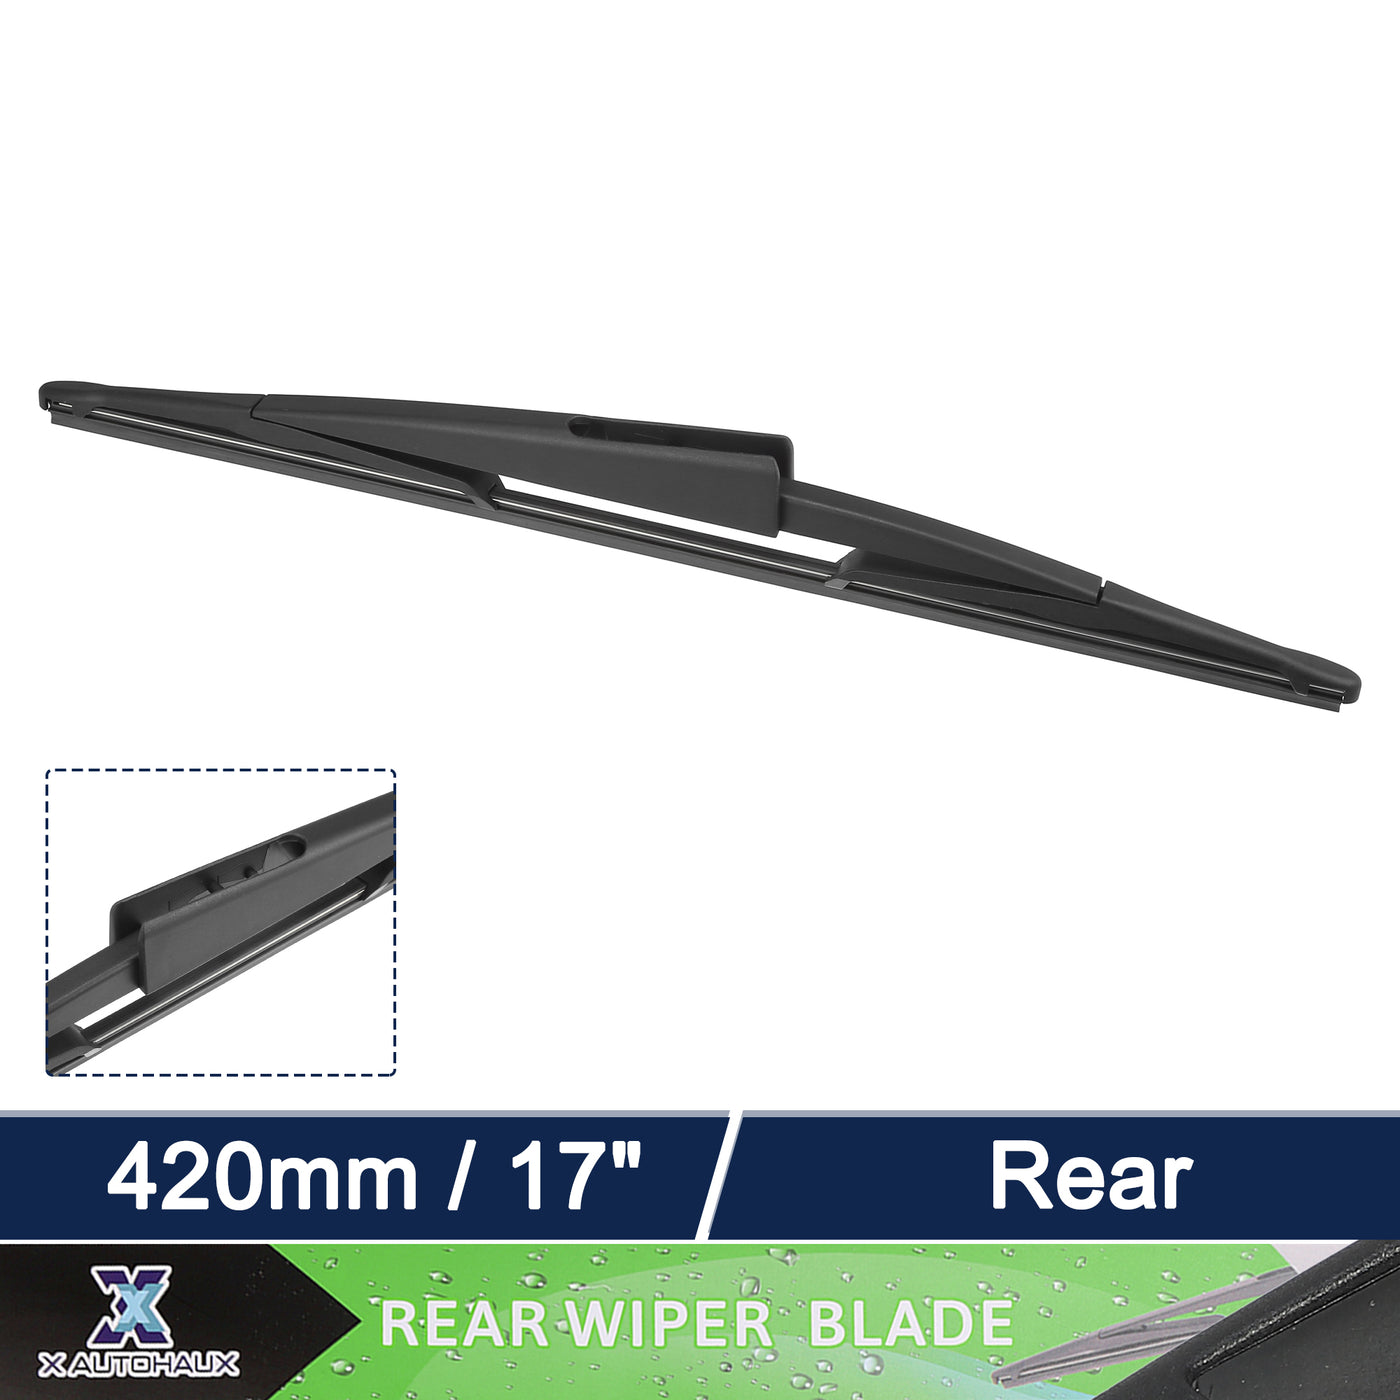 X AUTOHAUX Rear Windshield Wiper Blade Replacement for Ford Expedition 2012-2015 for Lincoln Navigator 2009-2016